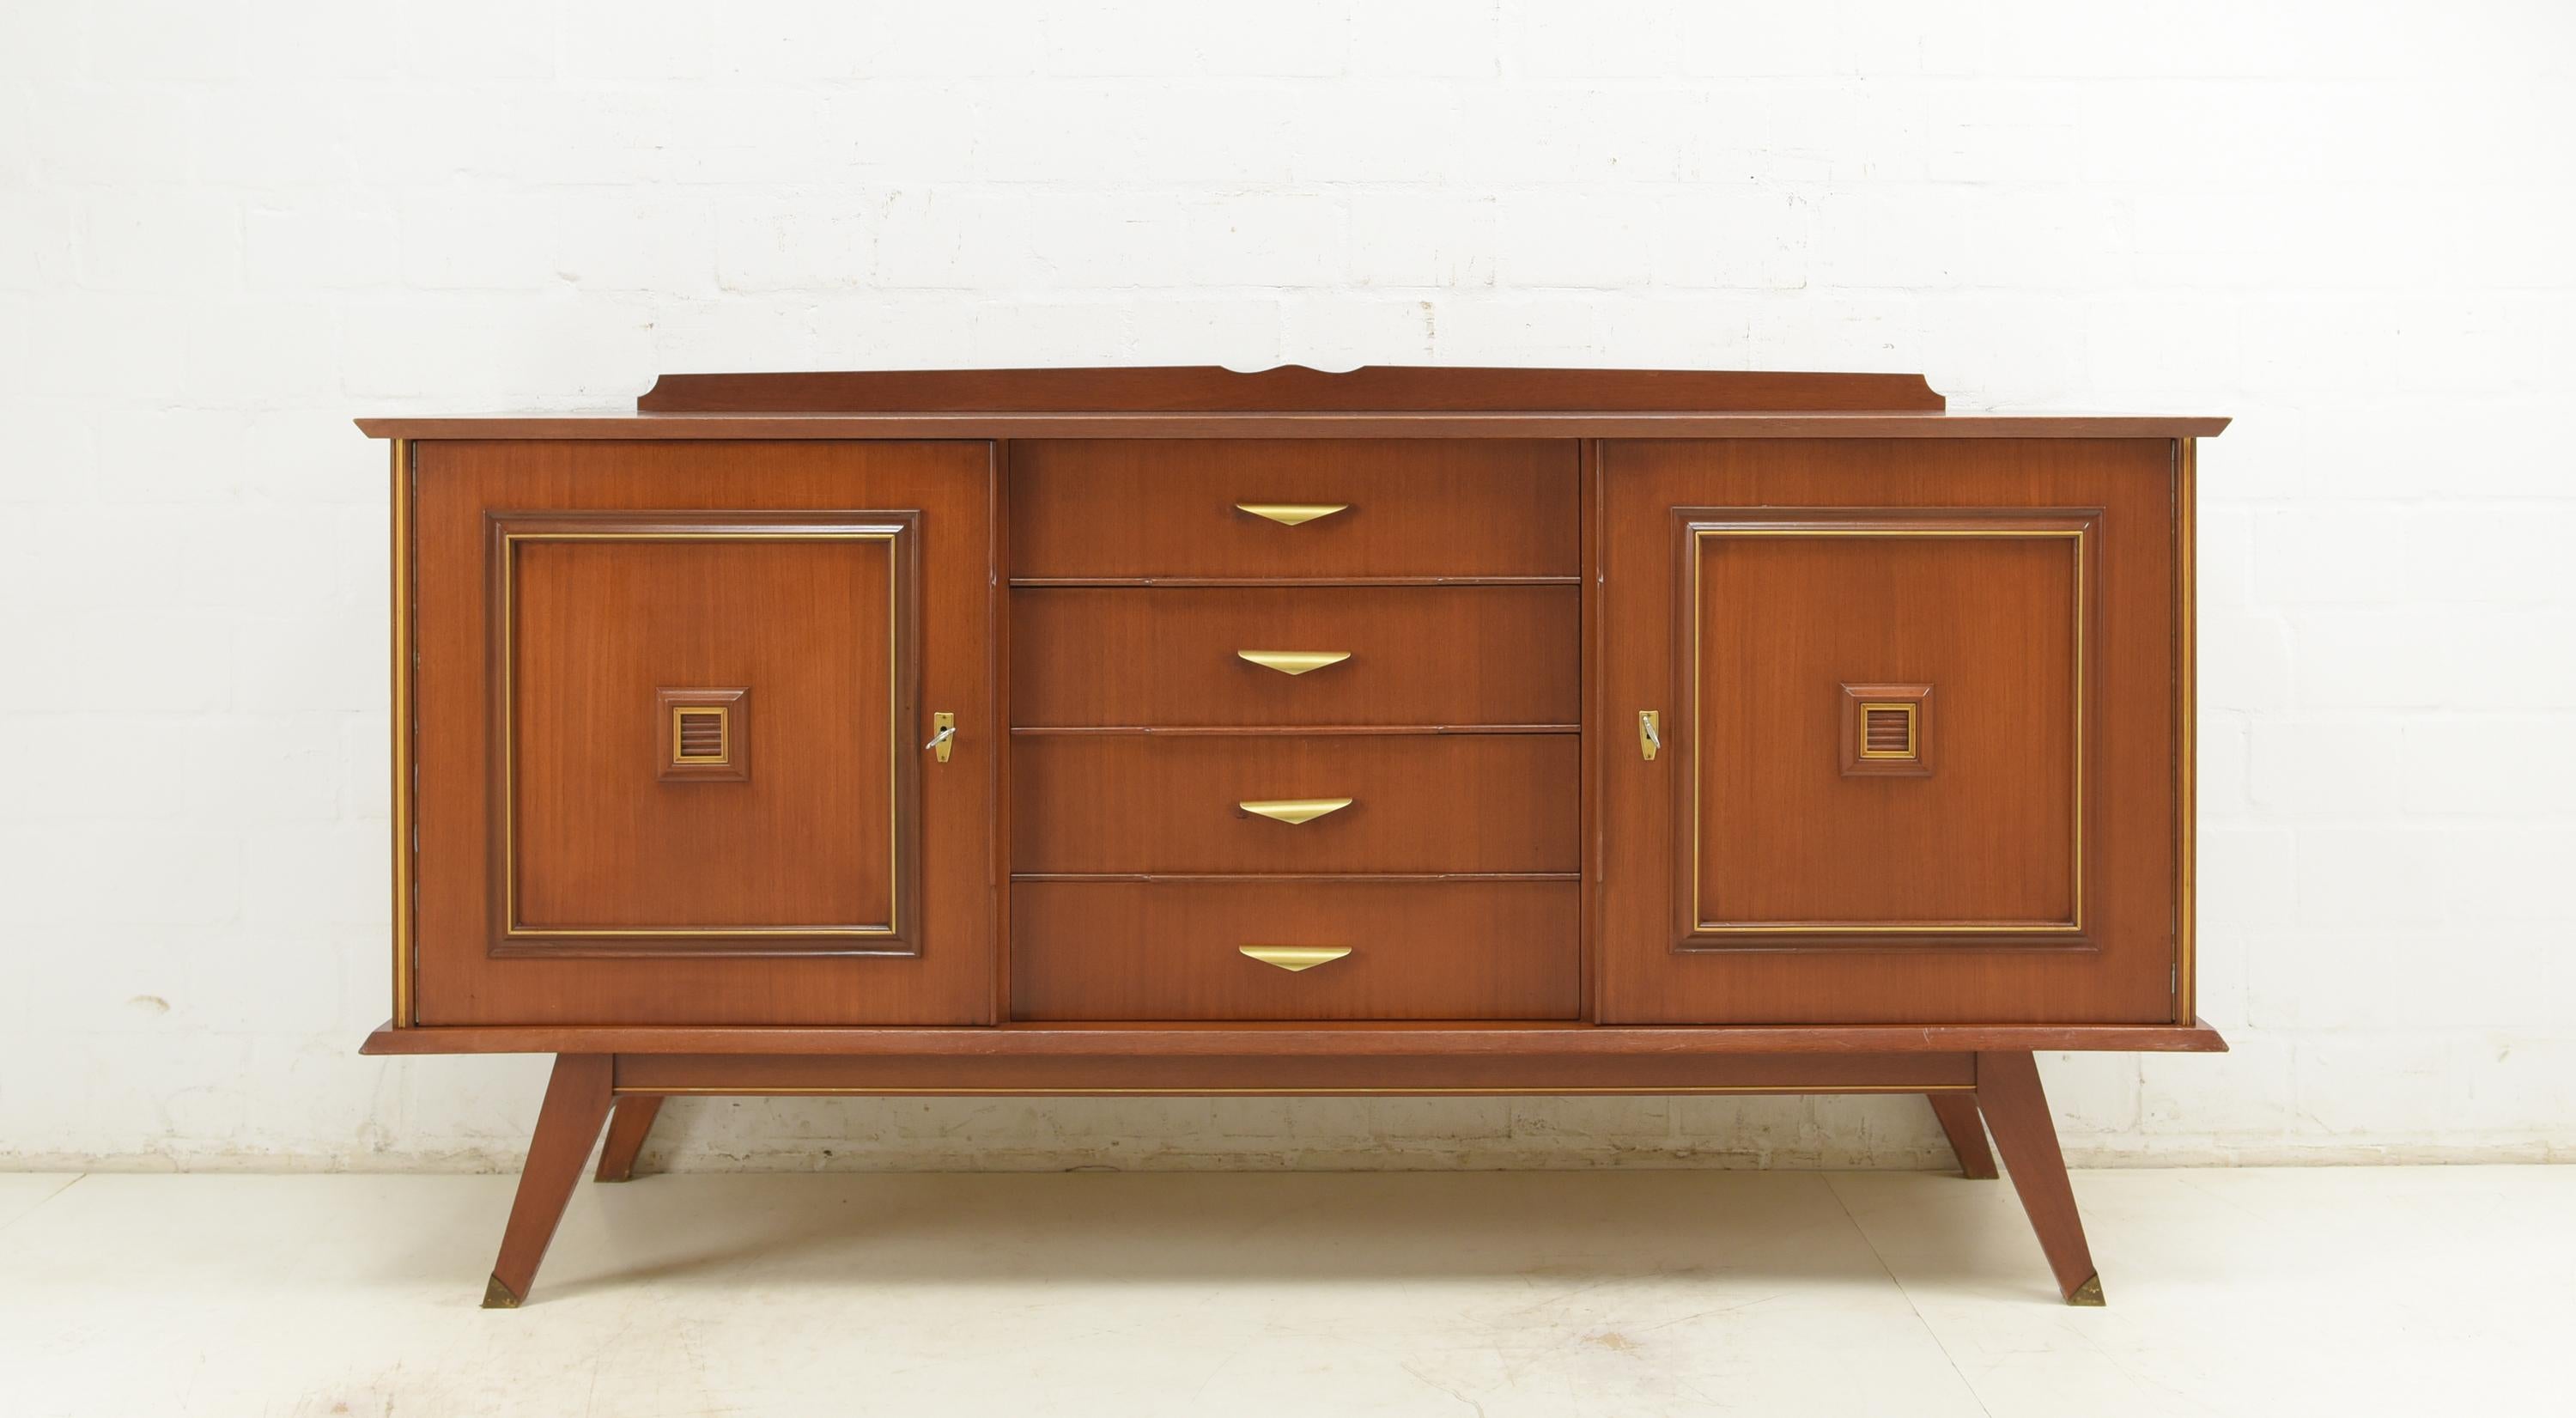 Sideboard restored midcentury 50s 60s vintage mahogany

Features:
Two-door model with 4 drawers
Very high quality processing
Drawers pronged
Shelves with inlaid edge on the inside
Original fittings and decorative elements made of anodized